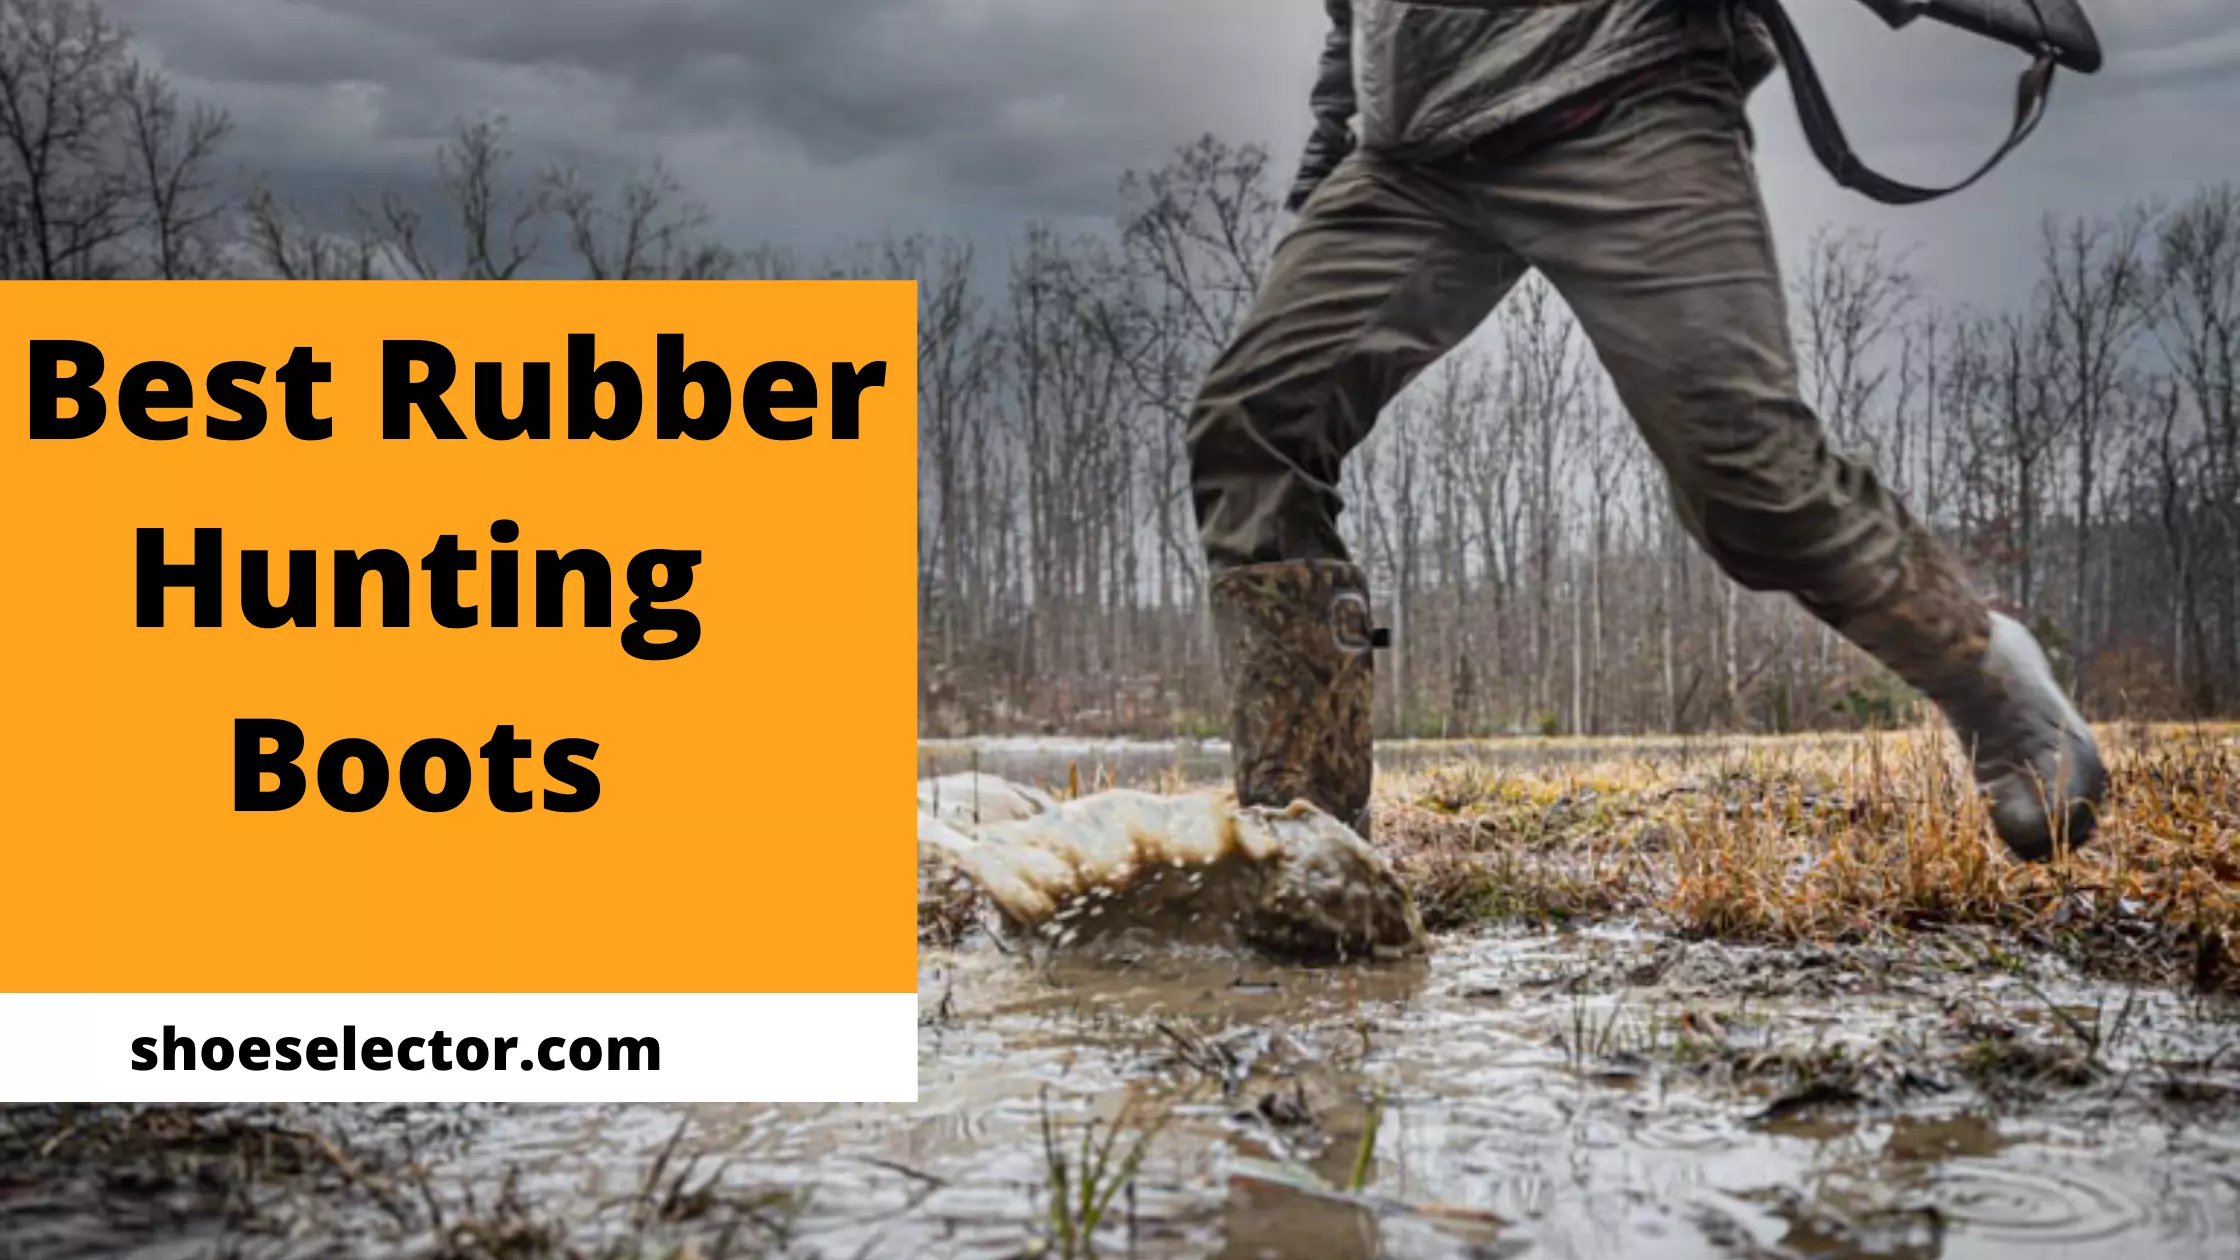 Our Favorite Pain Relief Best Rubber Hunting Boots 